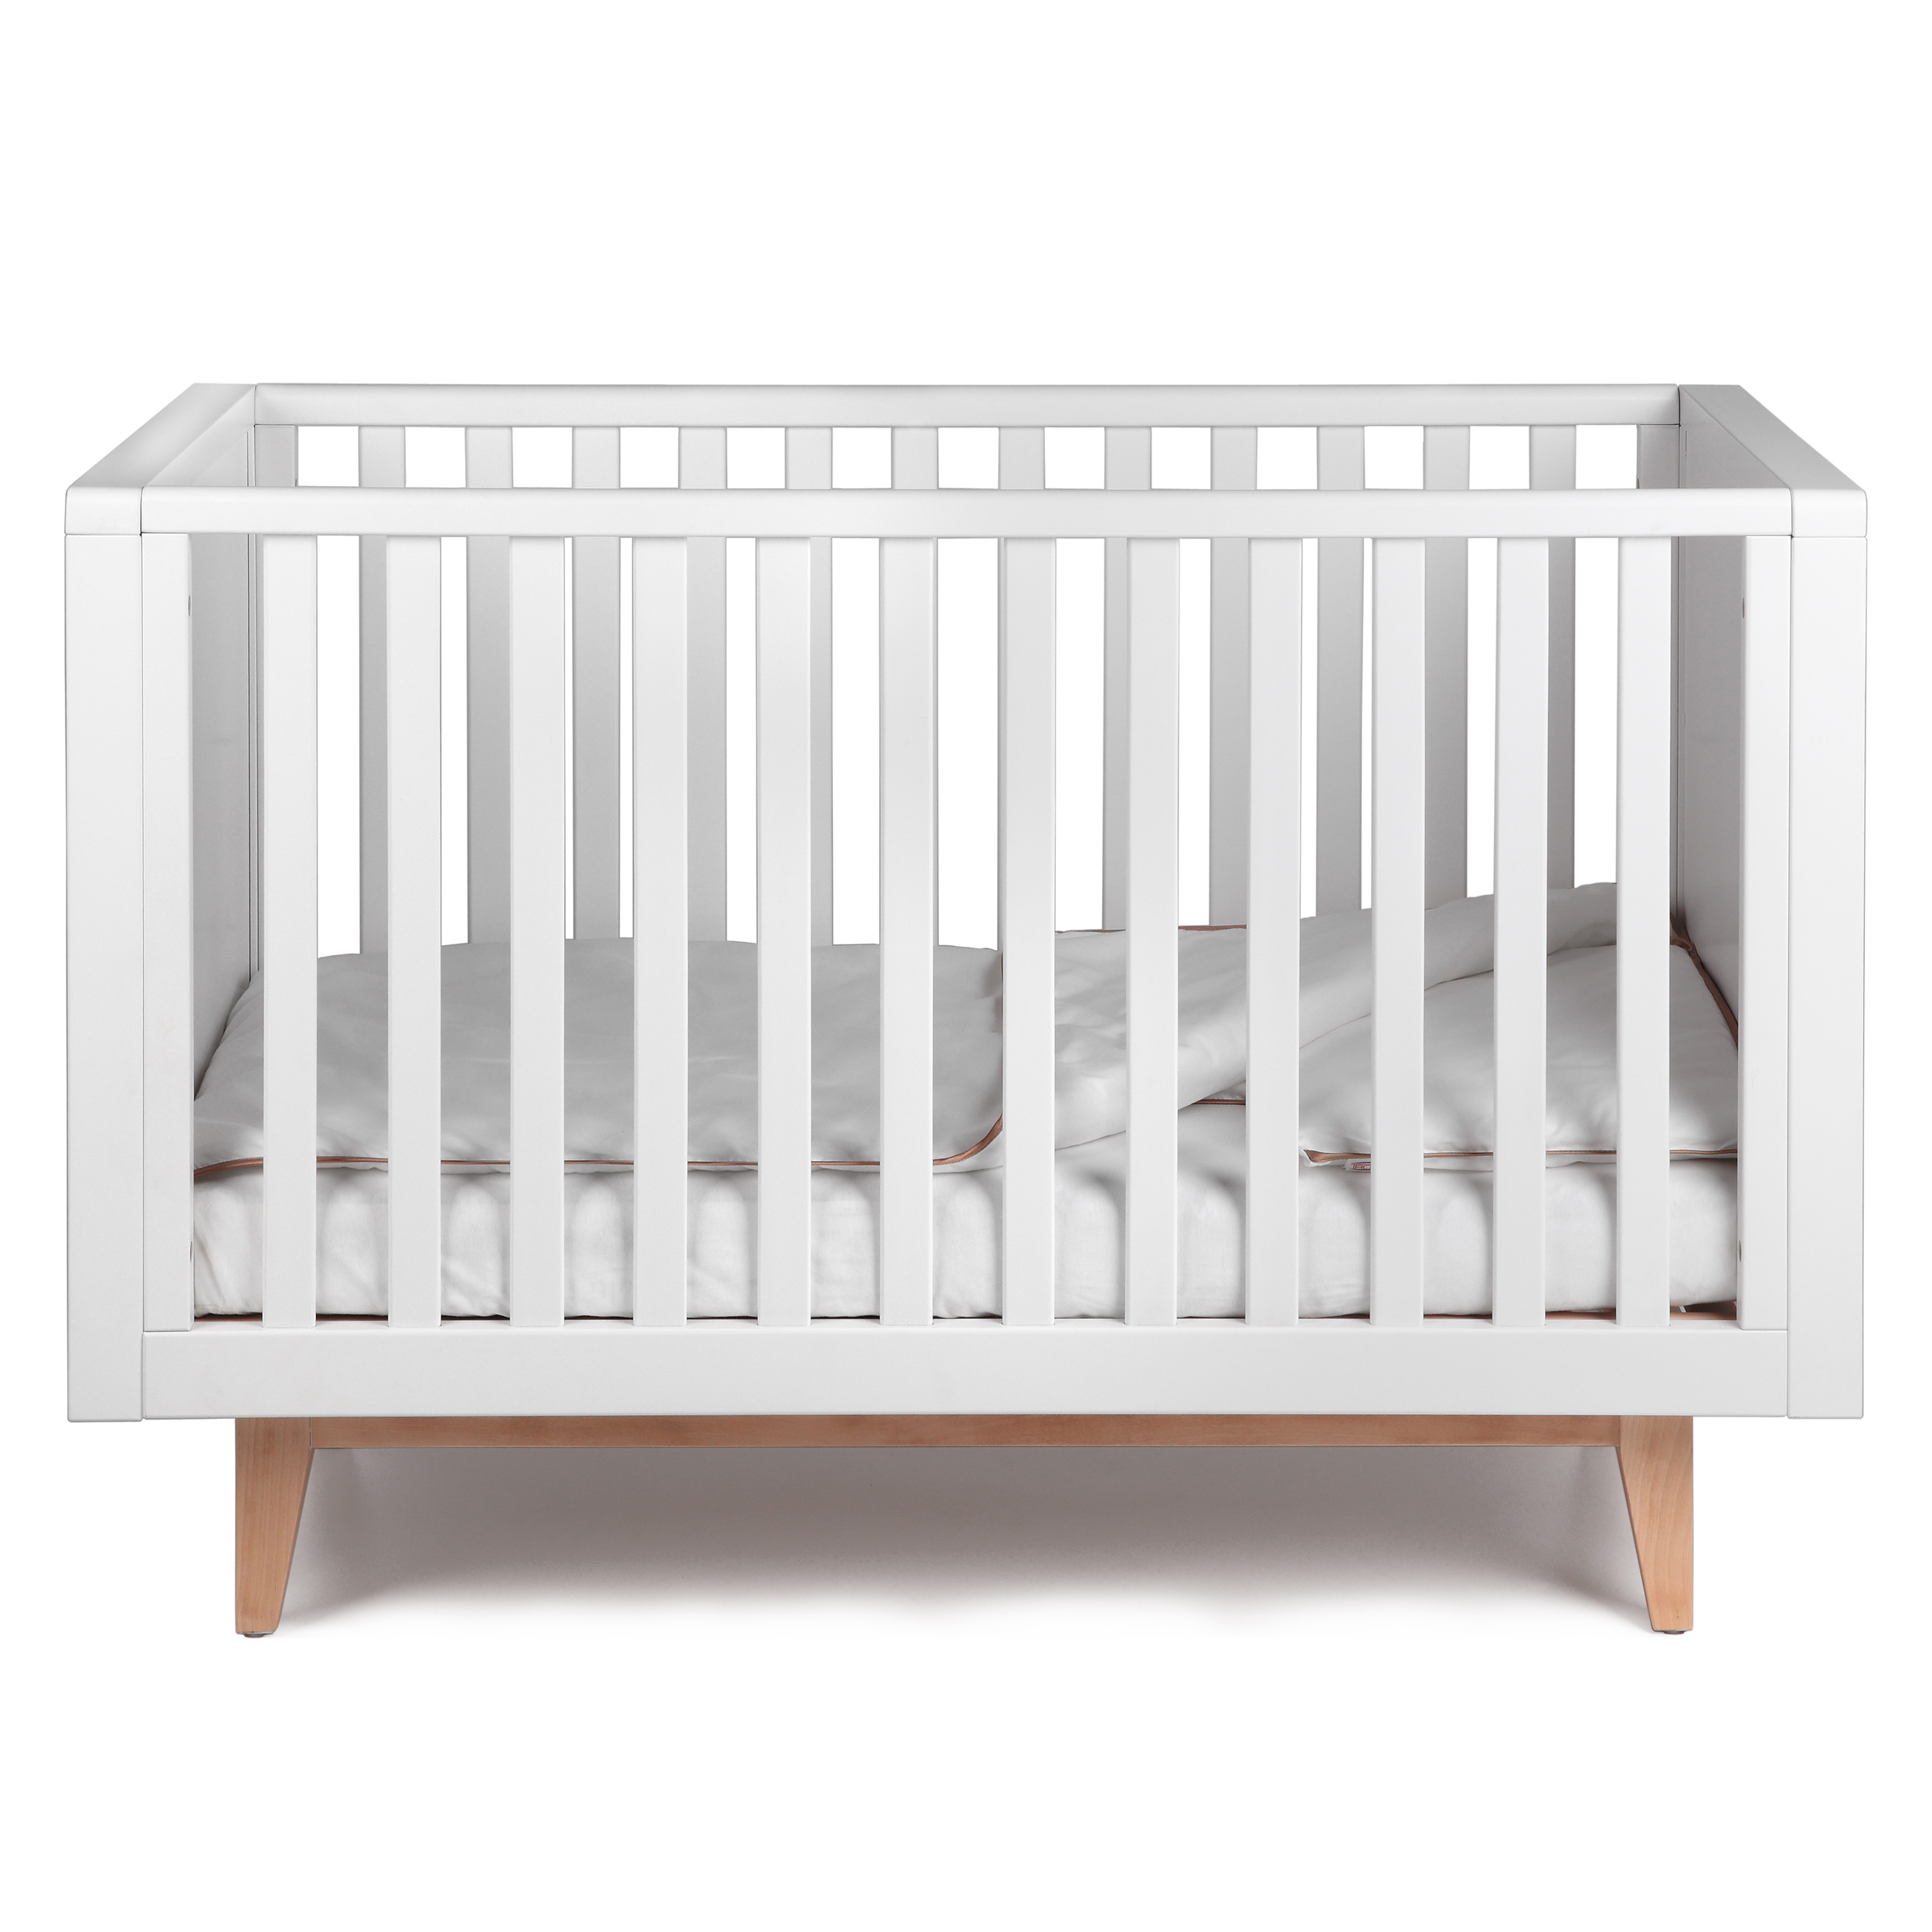 troll scandy cot bed reviews